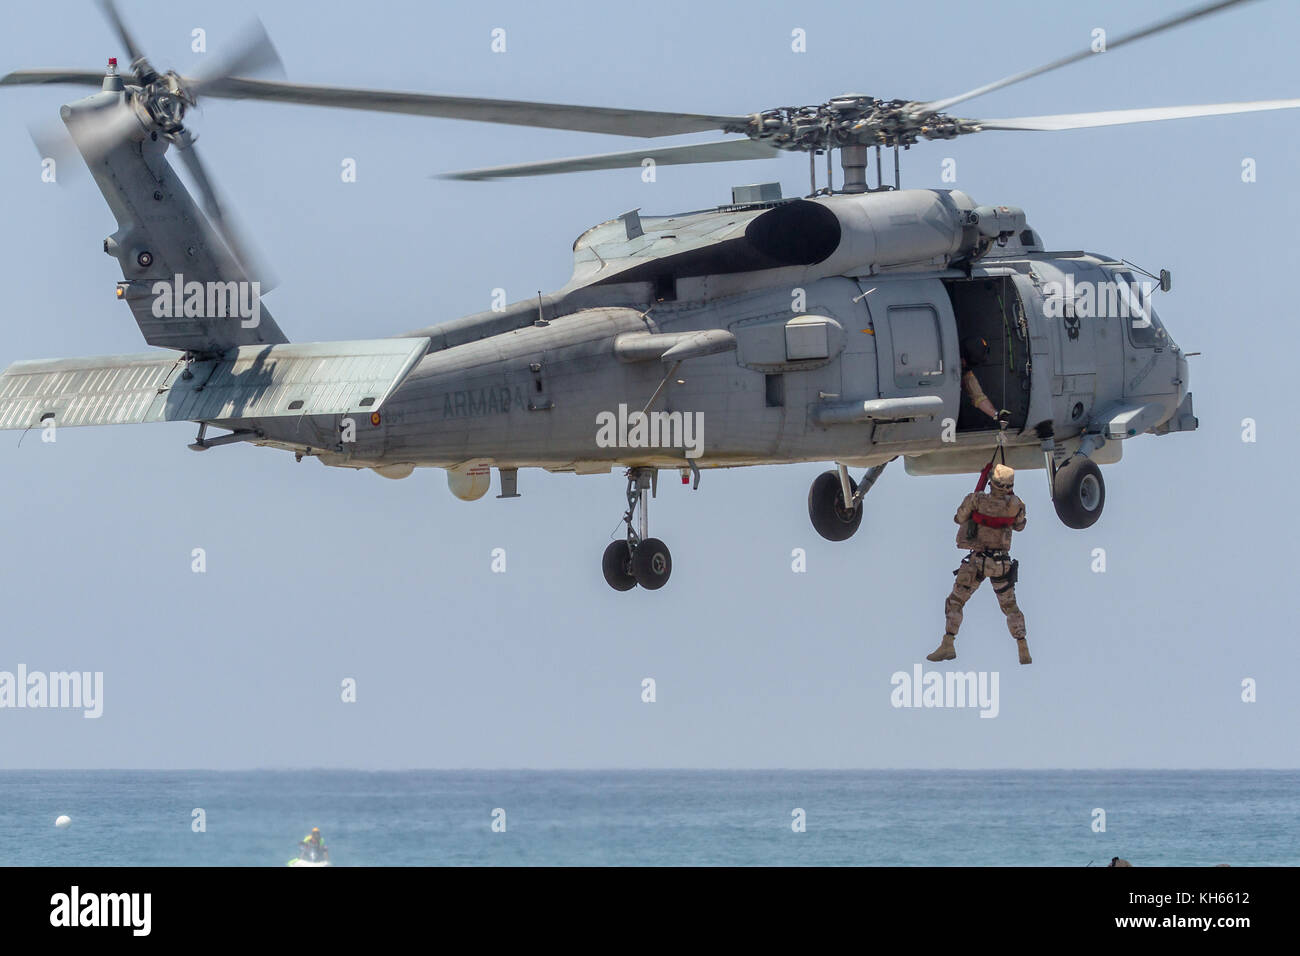 MOTRIL, GRANADA, SPAIN-JUN 11: Helicopter SH-60B Seahawk taking part in an exhibition on the 12th international airshow of Motril on Jun 11, 2017, in  Stock Photo